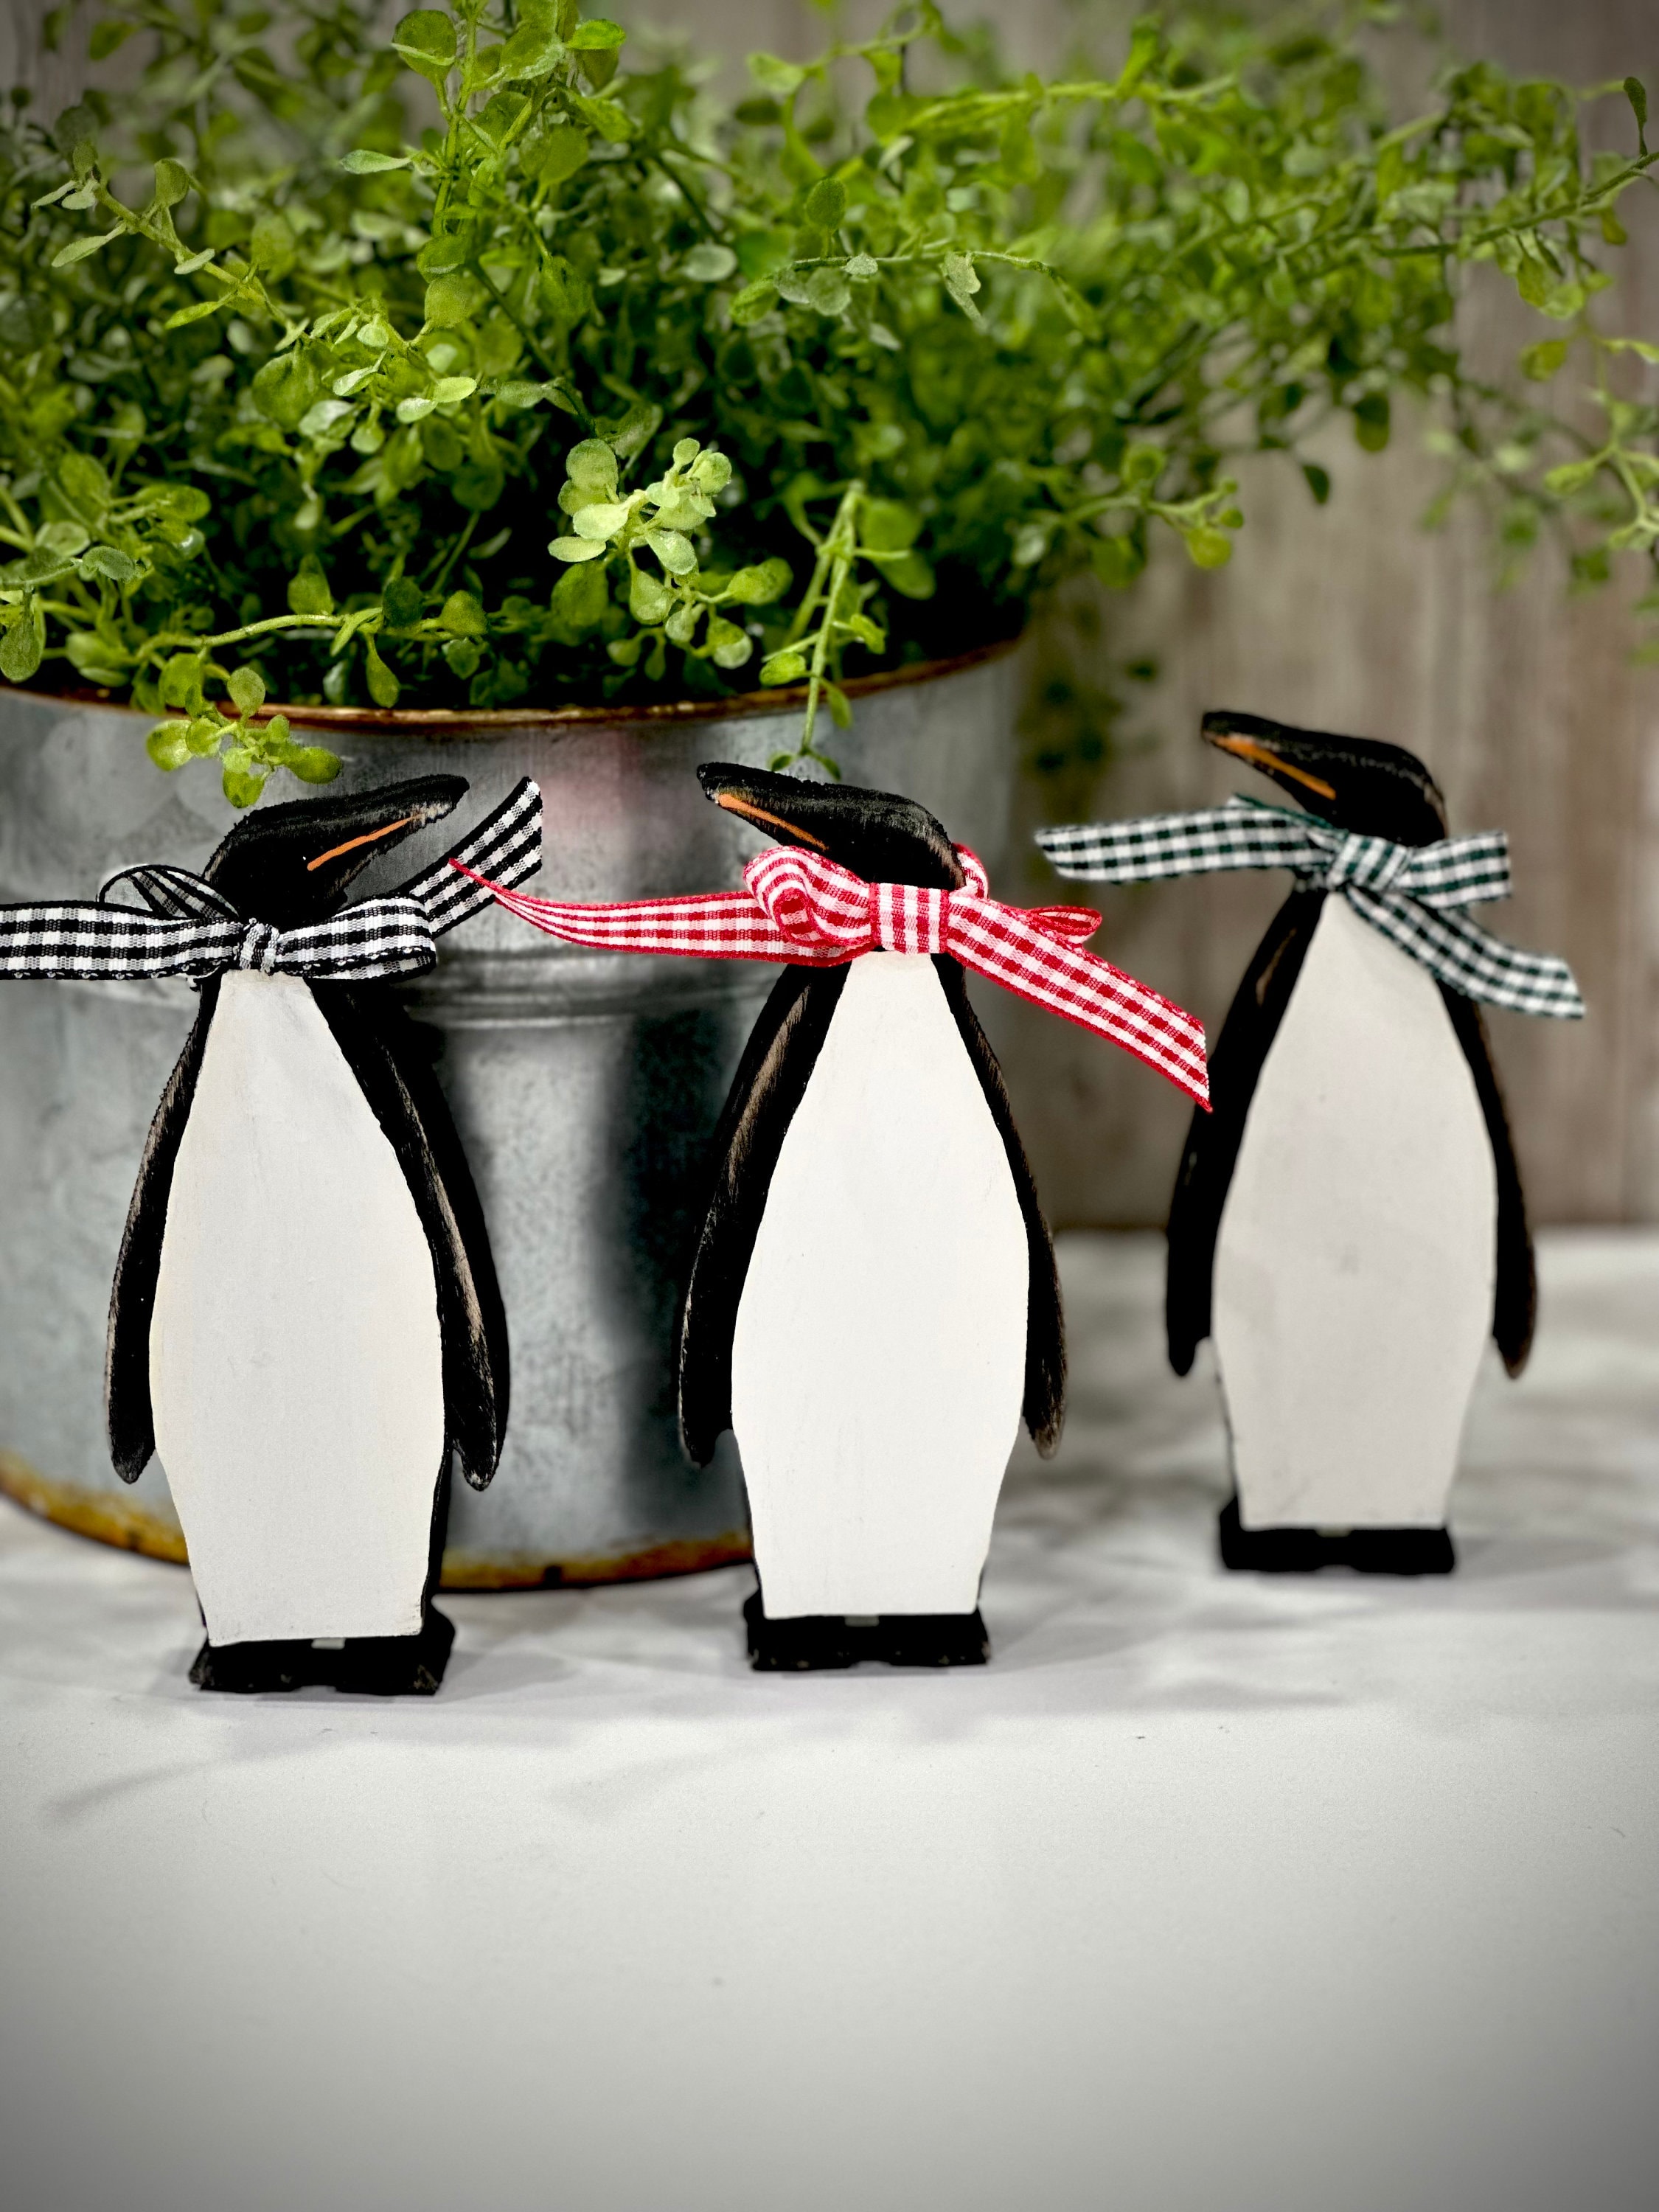 Penguin Holiday Centerpiece - household items - by owner - housewares sale  - craigslist